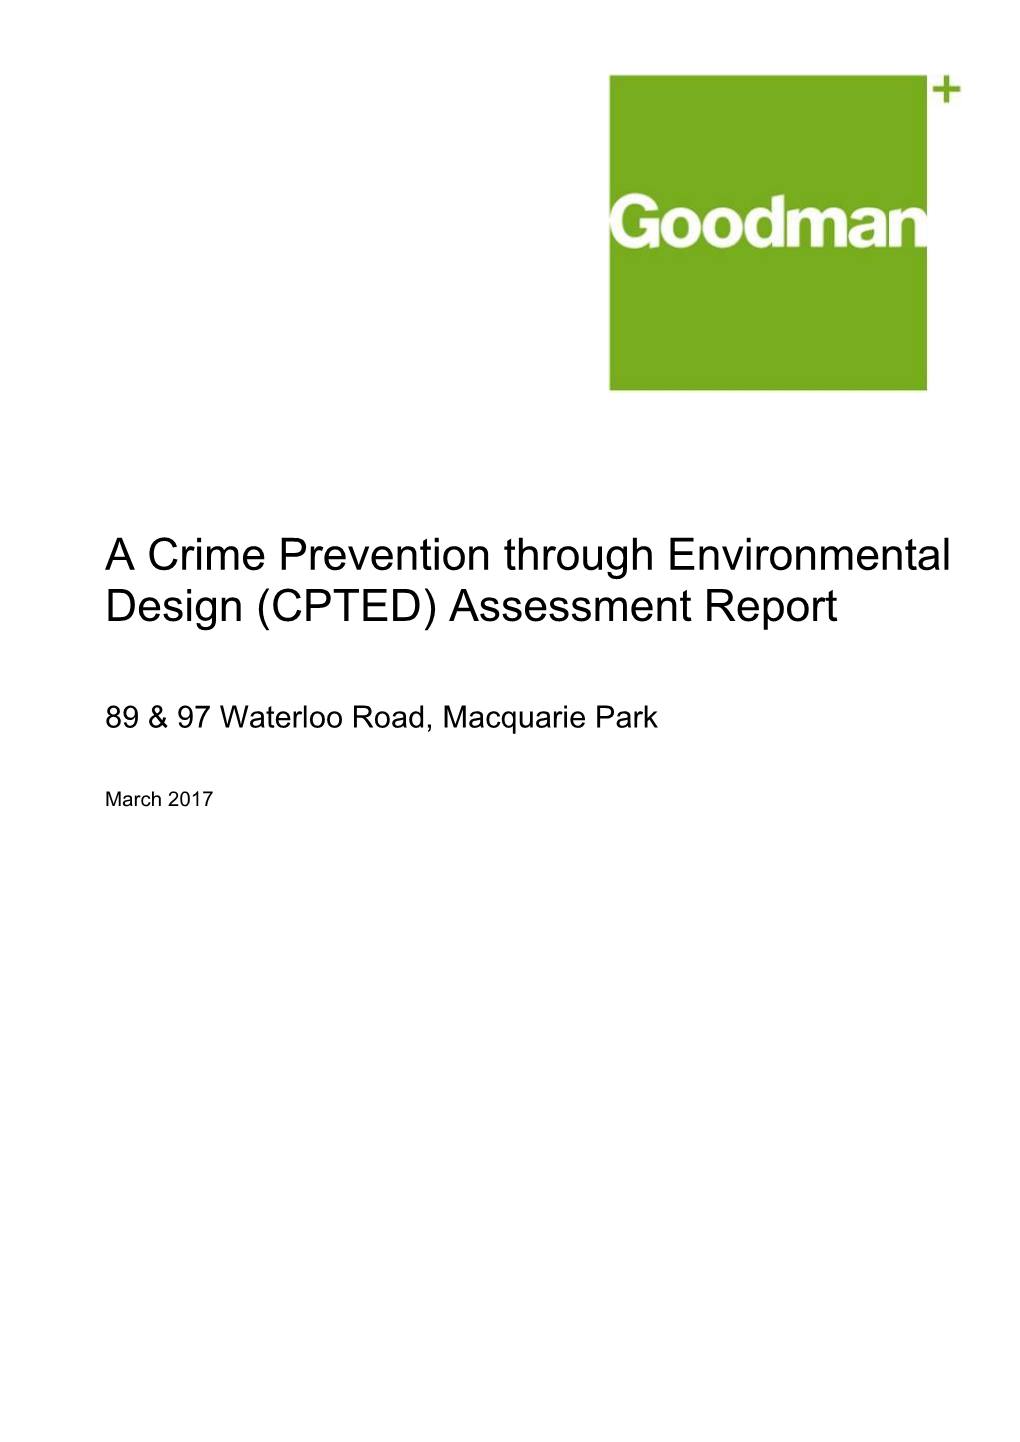 A Crime Prevention Through Environmental Design (CPTED) Assessment Report